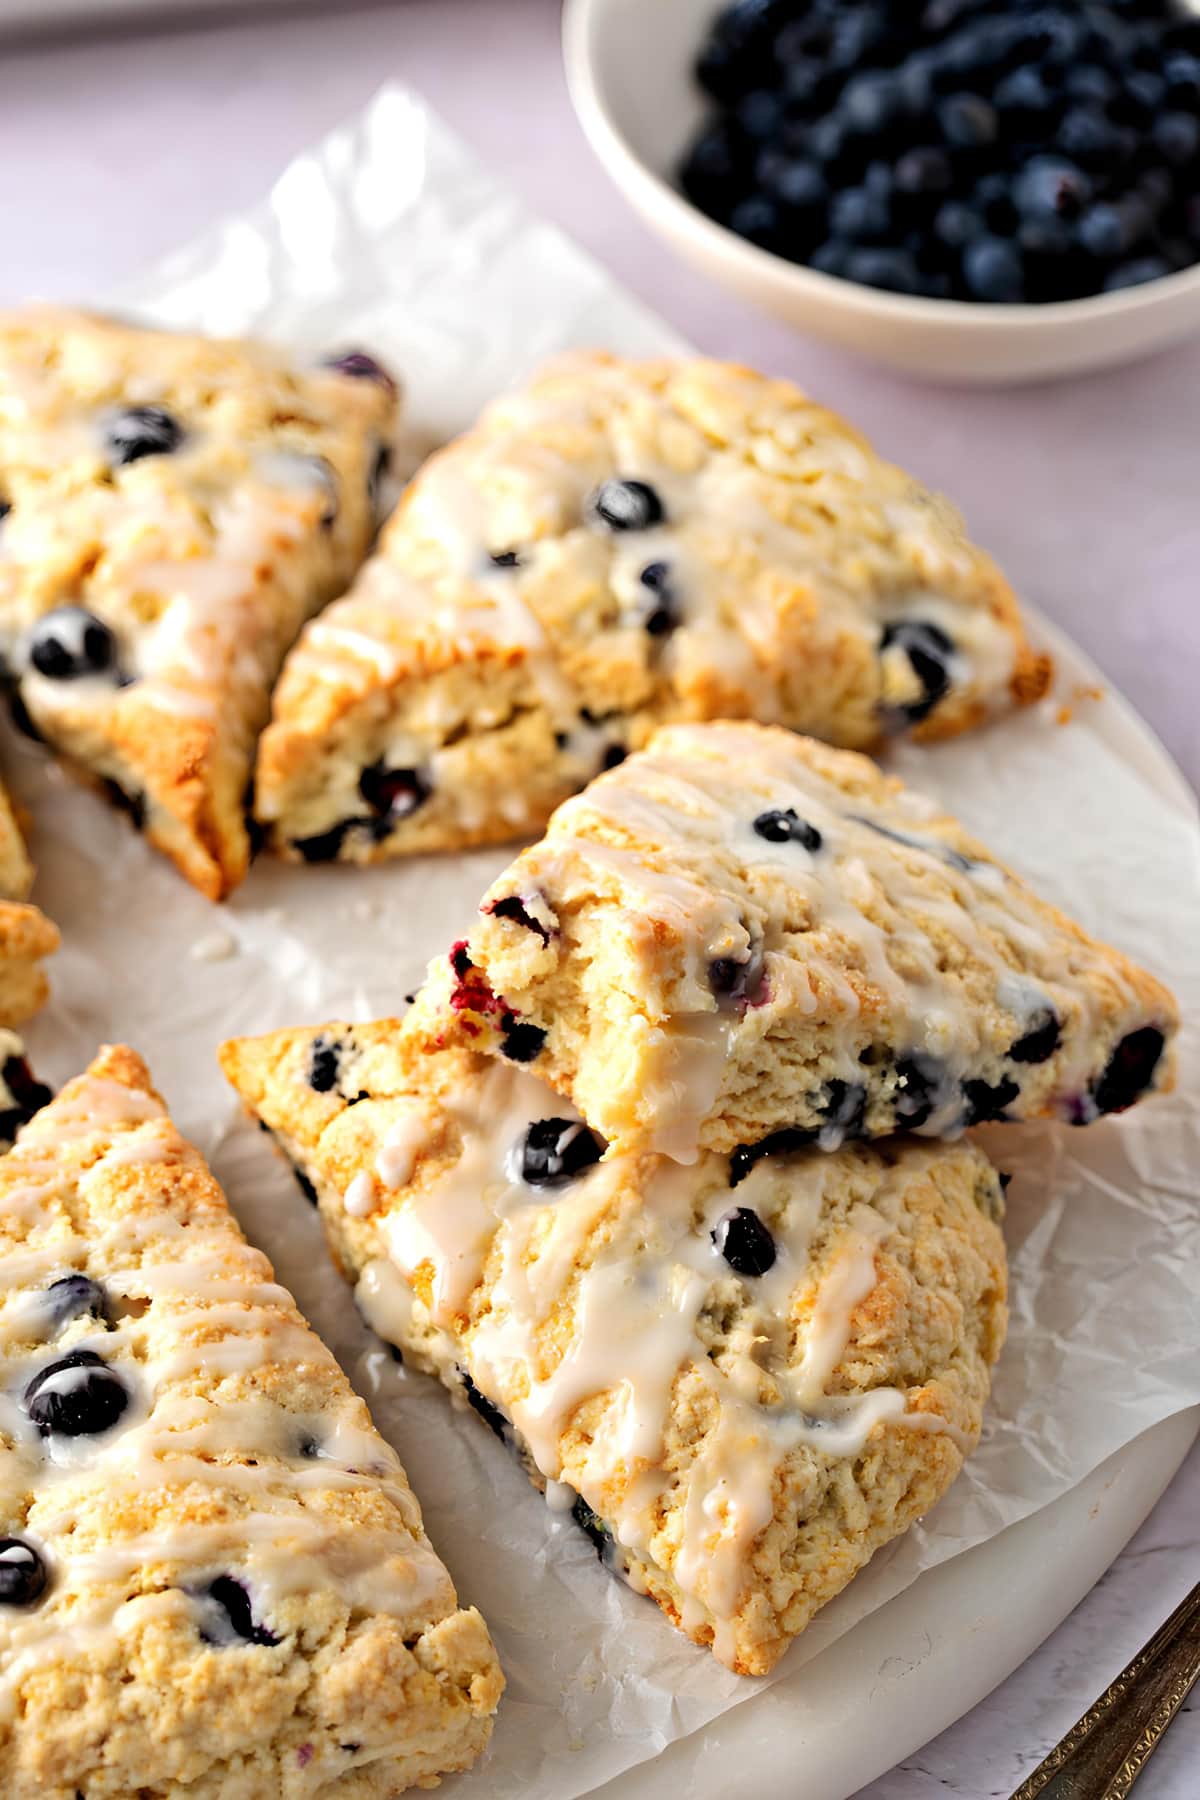 Sliced Blueberry Scones on a Parchment Paper